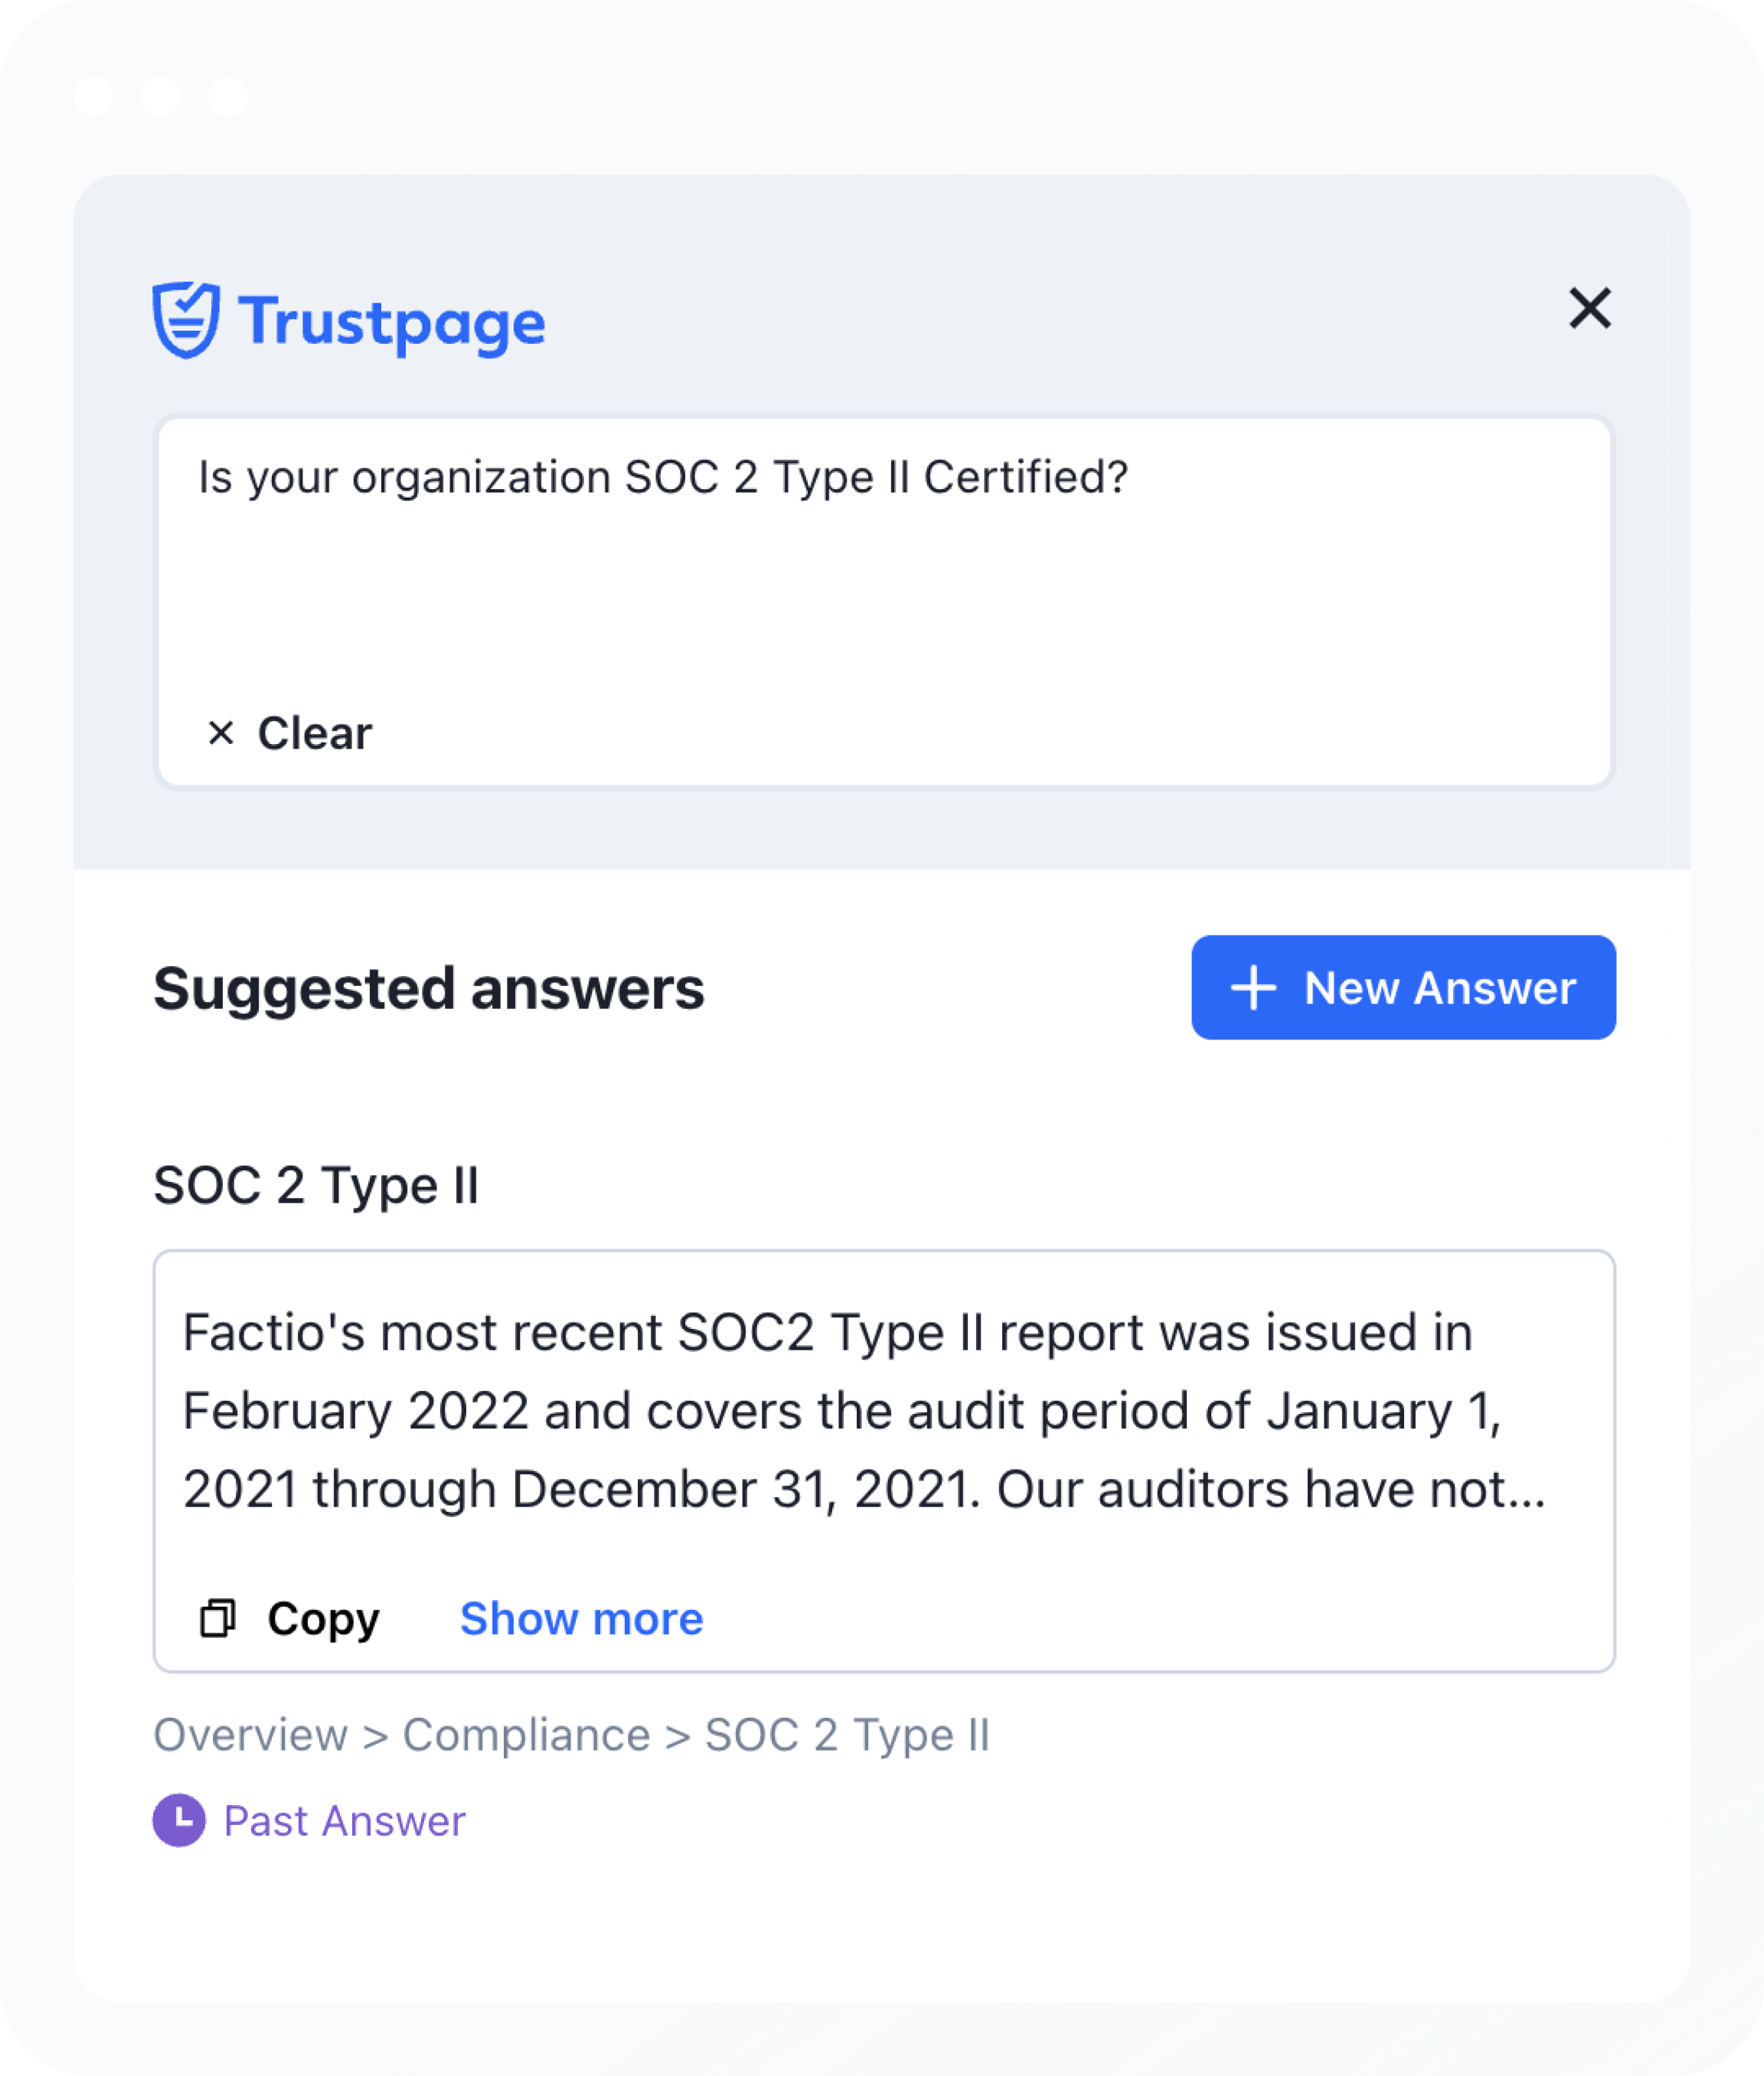 The Trustpage extension allows users to search for accurate answers to the most important security questions.